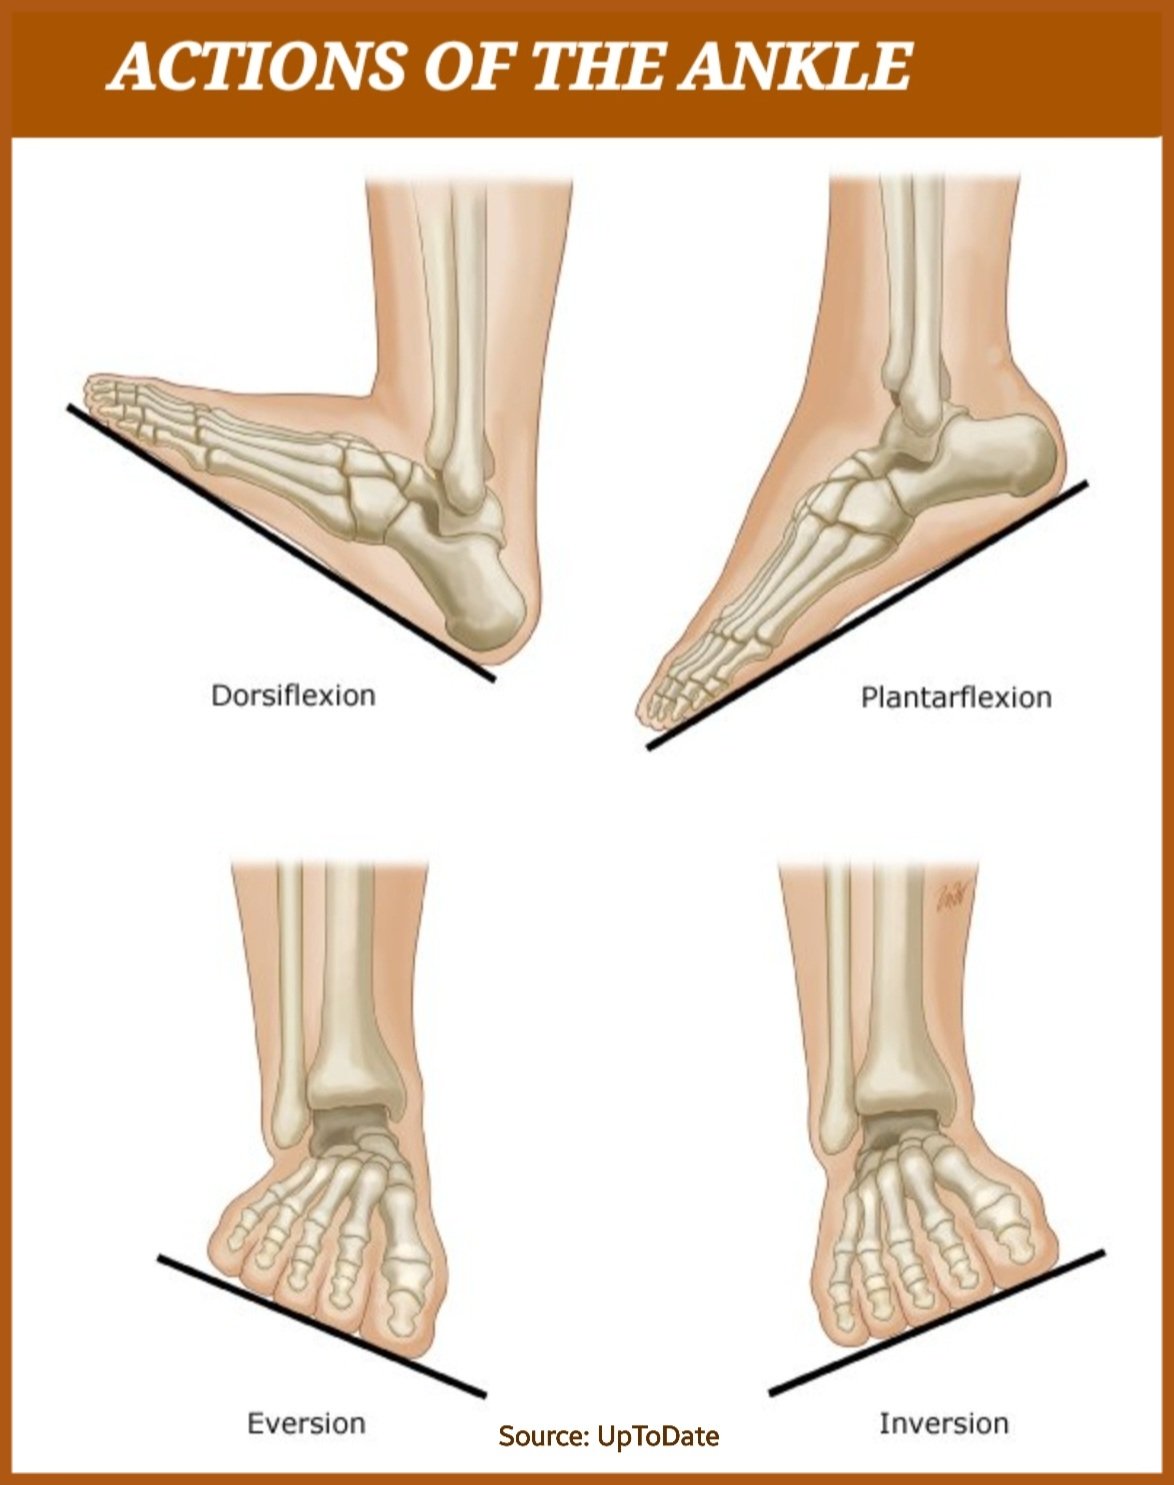 Dr. OMID BANDARCHI on X: The fundamental actions & movements of the ANKLE  are: □ Dorsiflexion □ Plantarflexion □ Eversion □ Inversion It is NOT  precise synonyms,but in order to remember quickly 